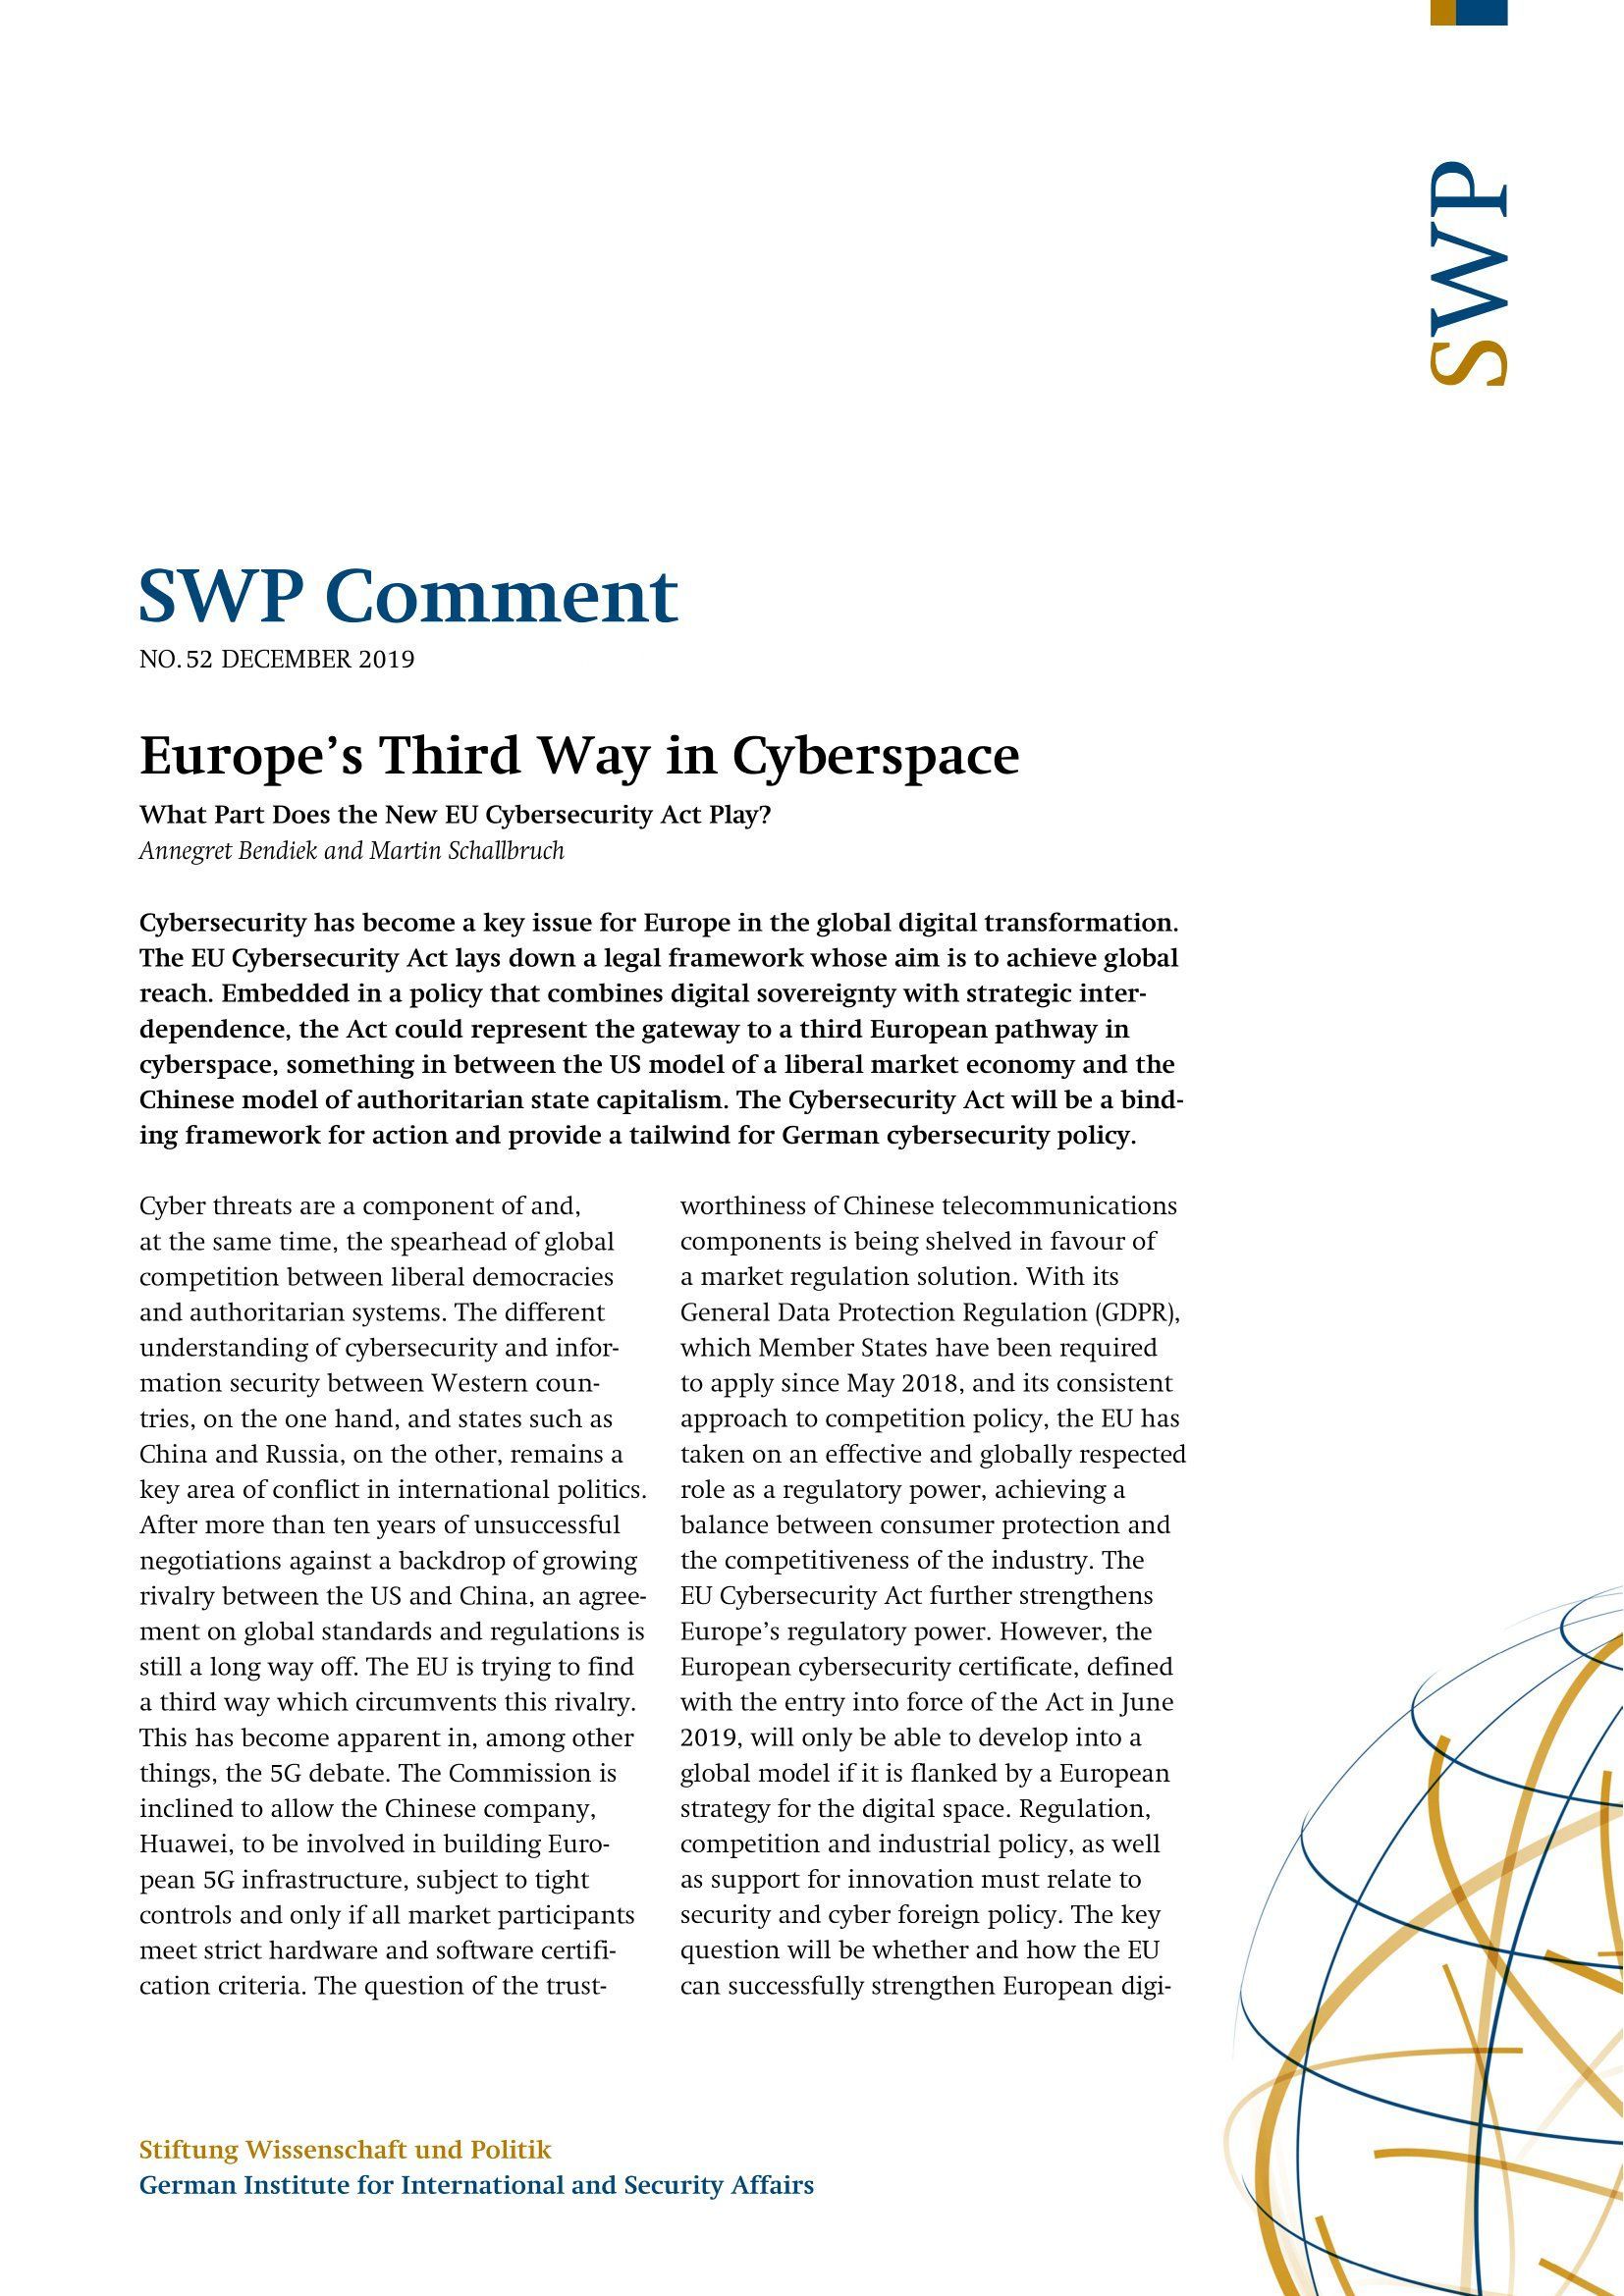 Europe’s Third Way in Cyberspace - What Part Does the New EU Cybersecurity Act Play?